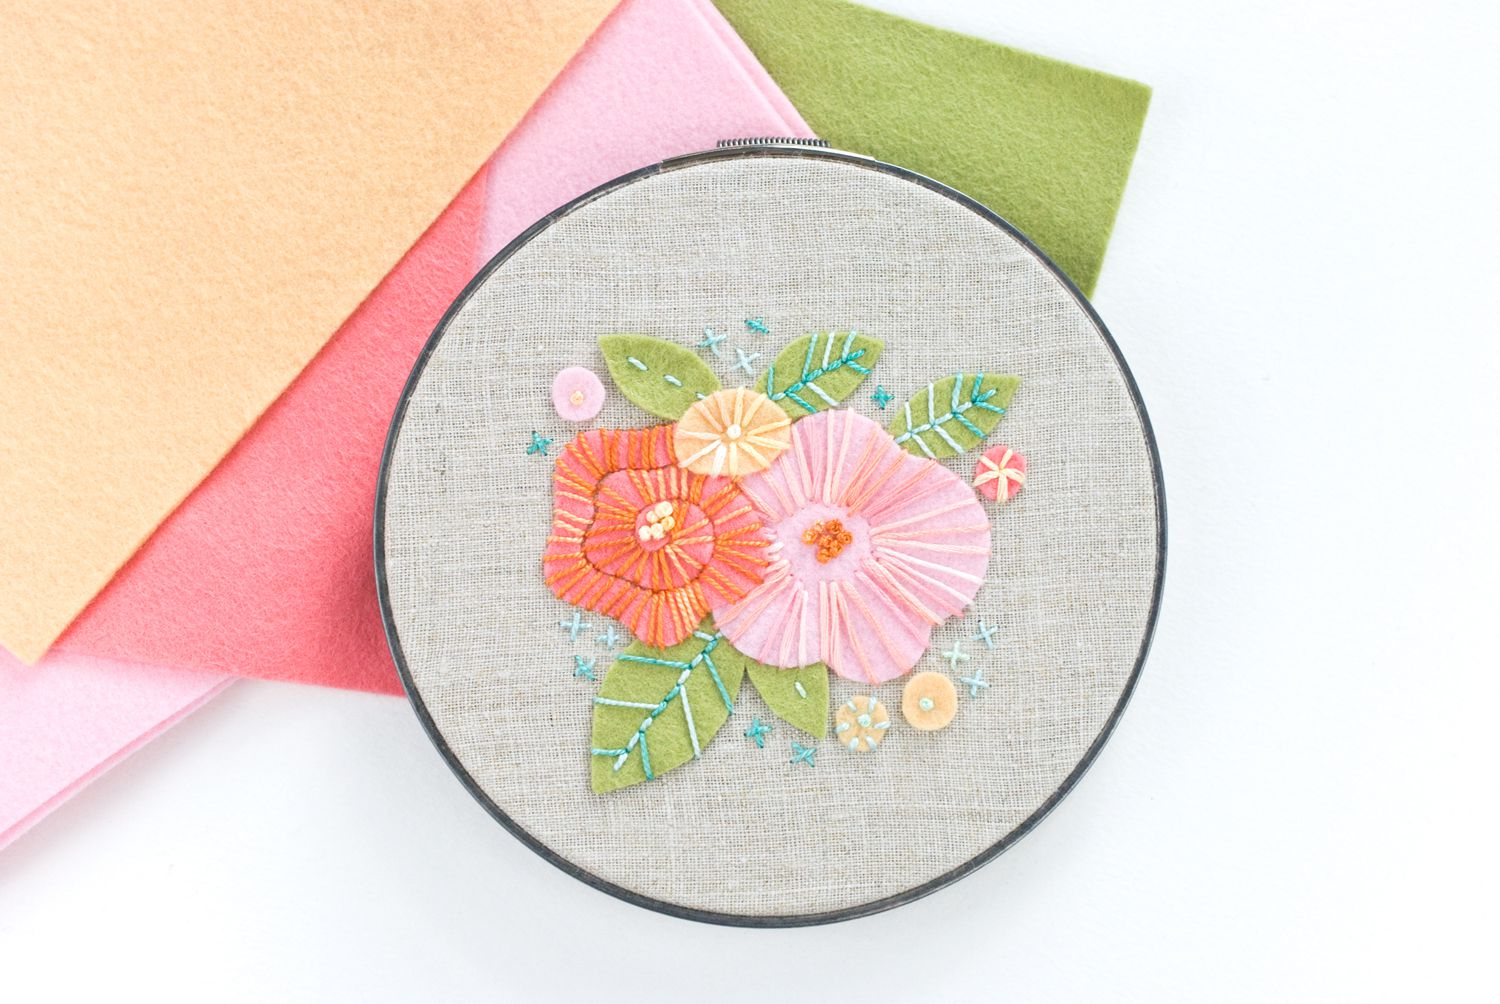 Felt Embroidery Patterns How To Create Embroidered Felt Flowers